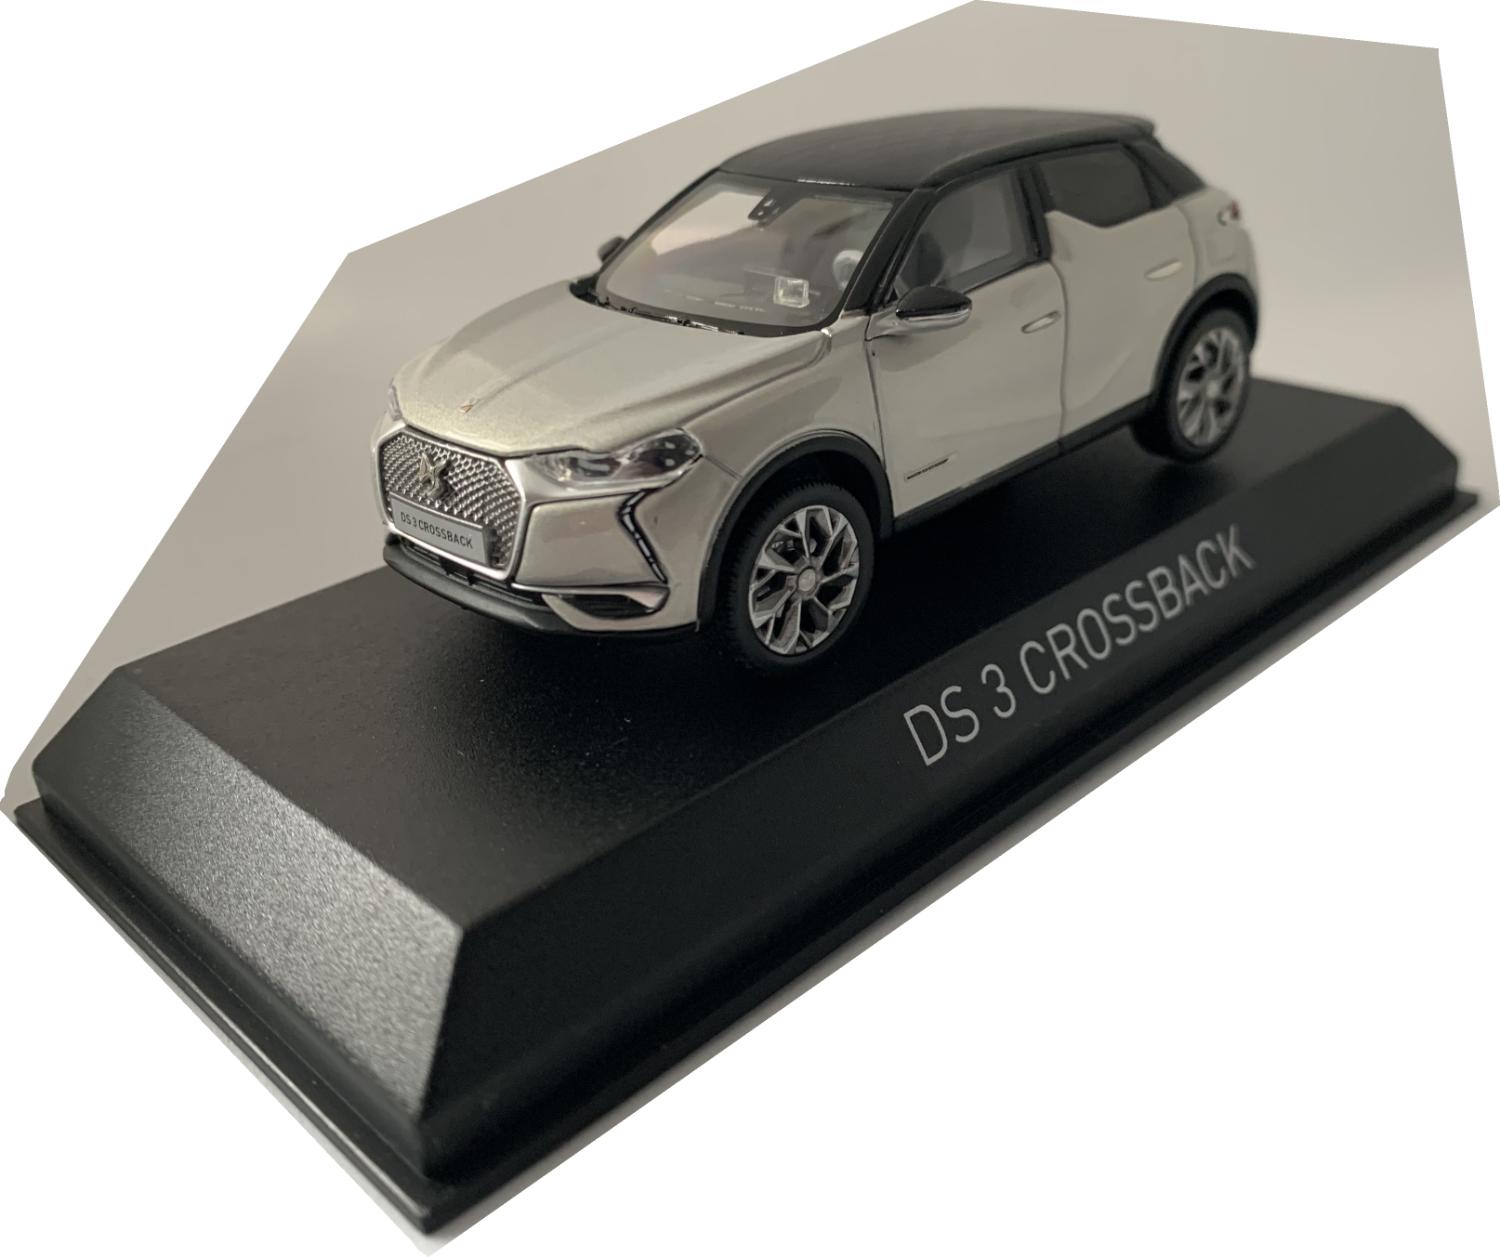 An excellent reproduction of the DS 3 Crossback E-Tense with detail throughout, all authentically recreated. Model is mounted on a removable plinth with a removable hard plastic cover